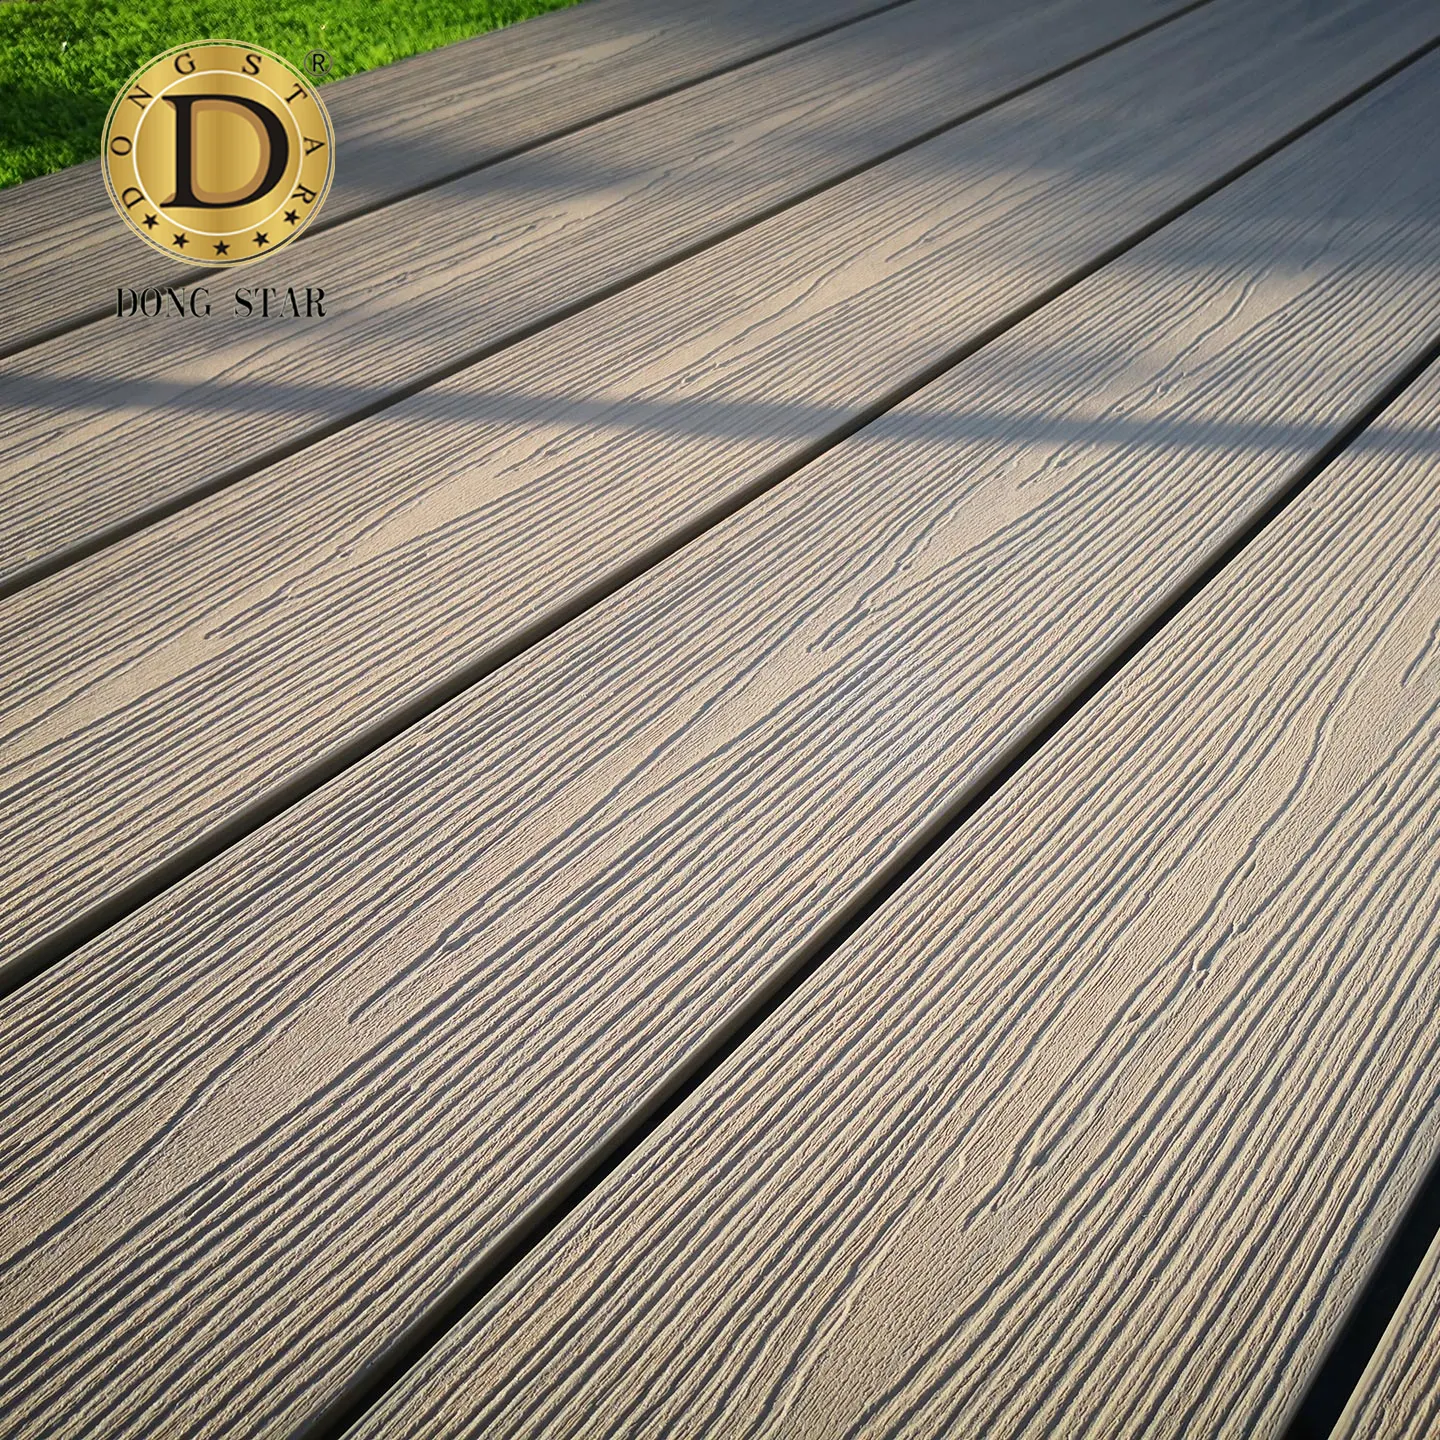 Eco-Friendly Outdoor Flooring Wpc Decking 100% Pvc Solid Composite Deck With High Quality